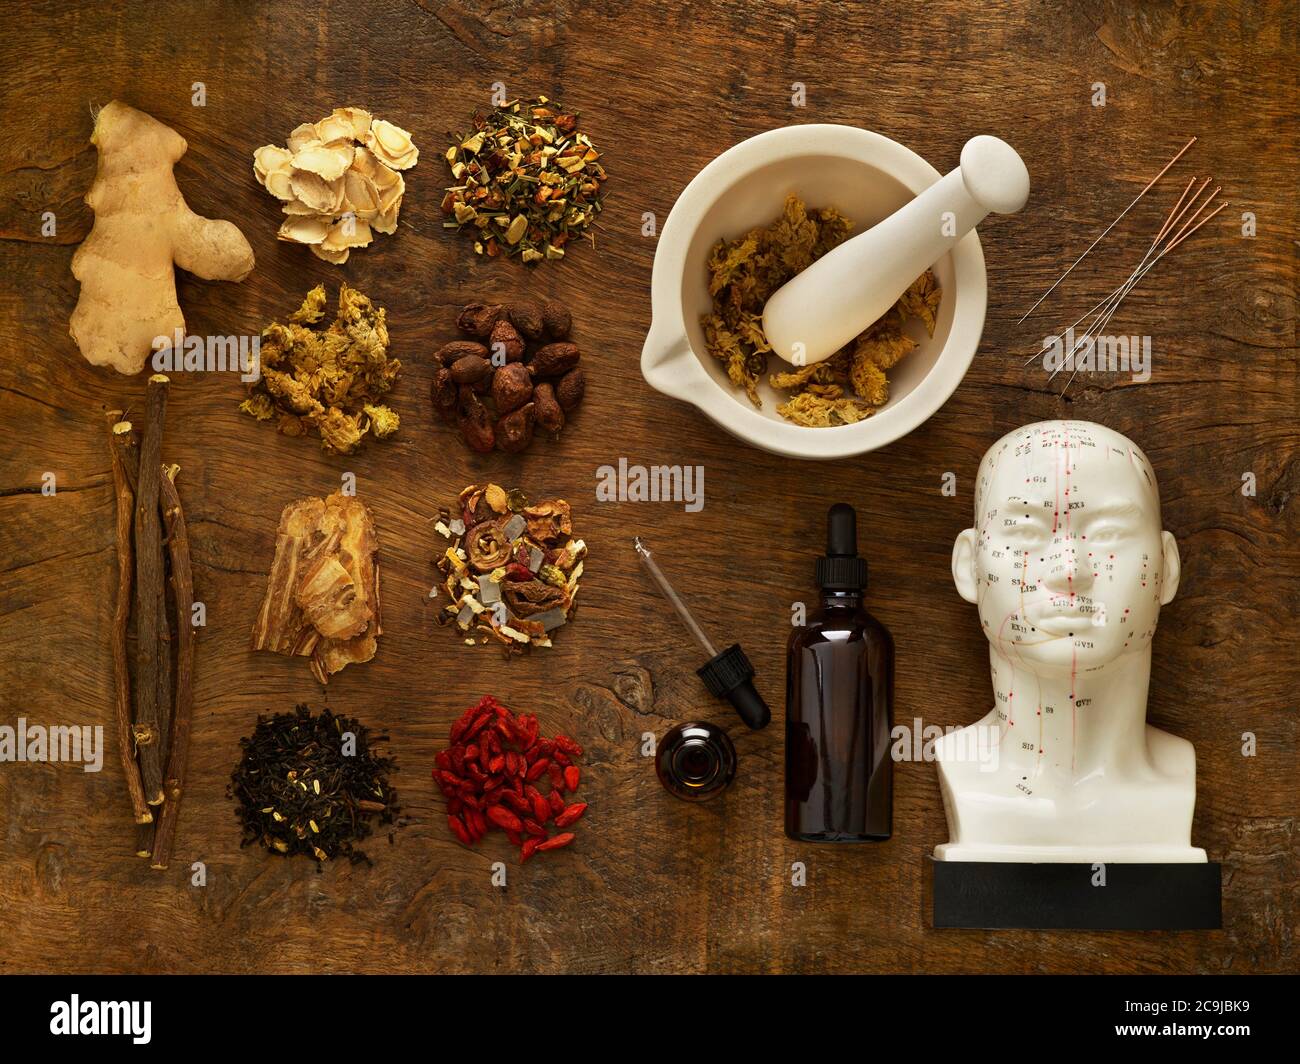 Herbs and equipment used for alternative medicine. Stock Photo